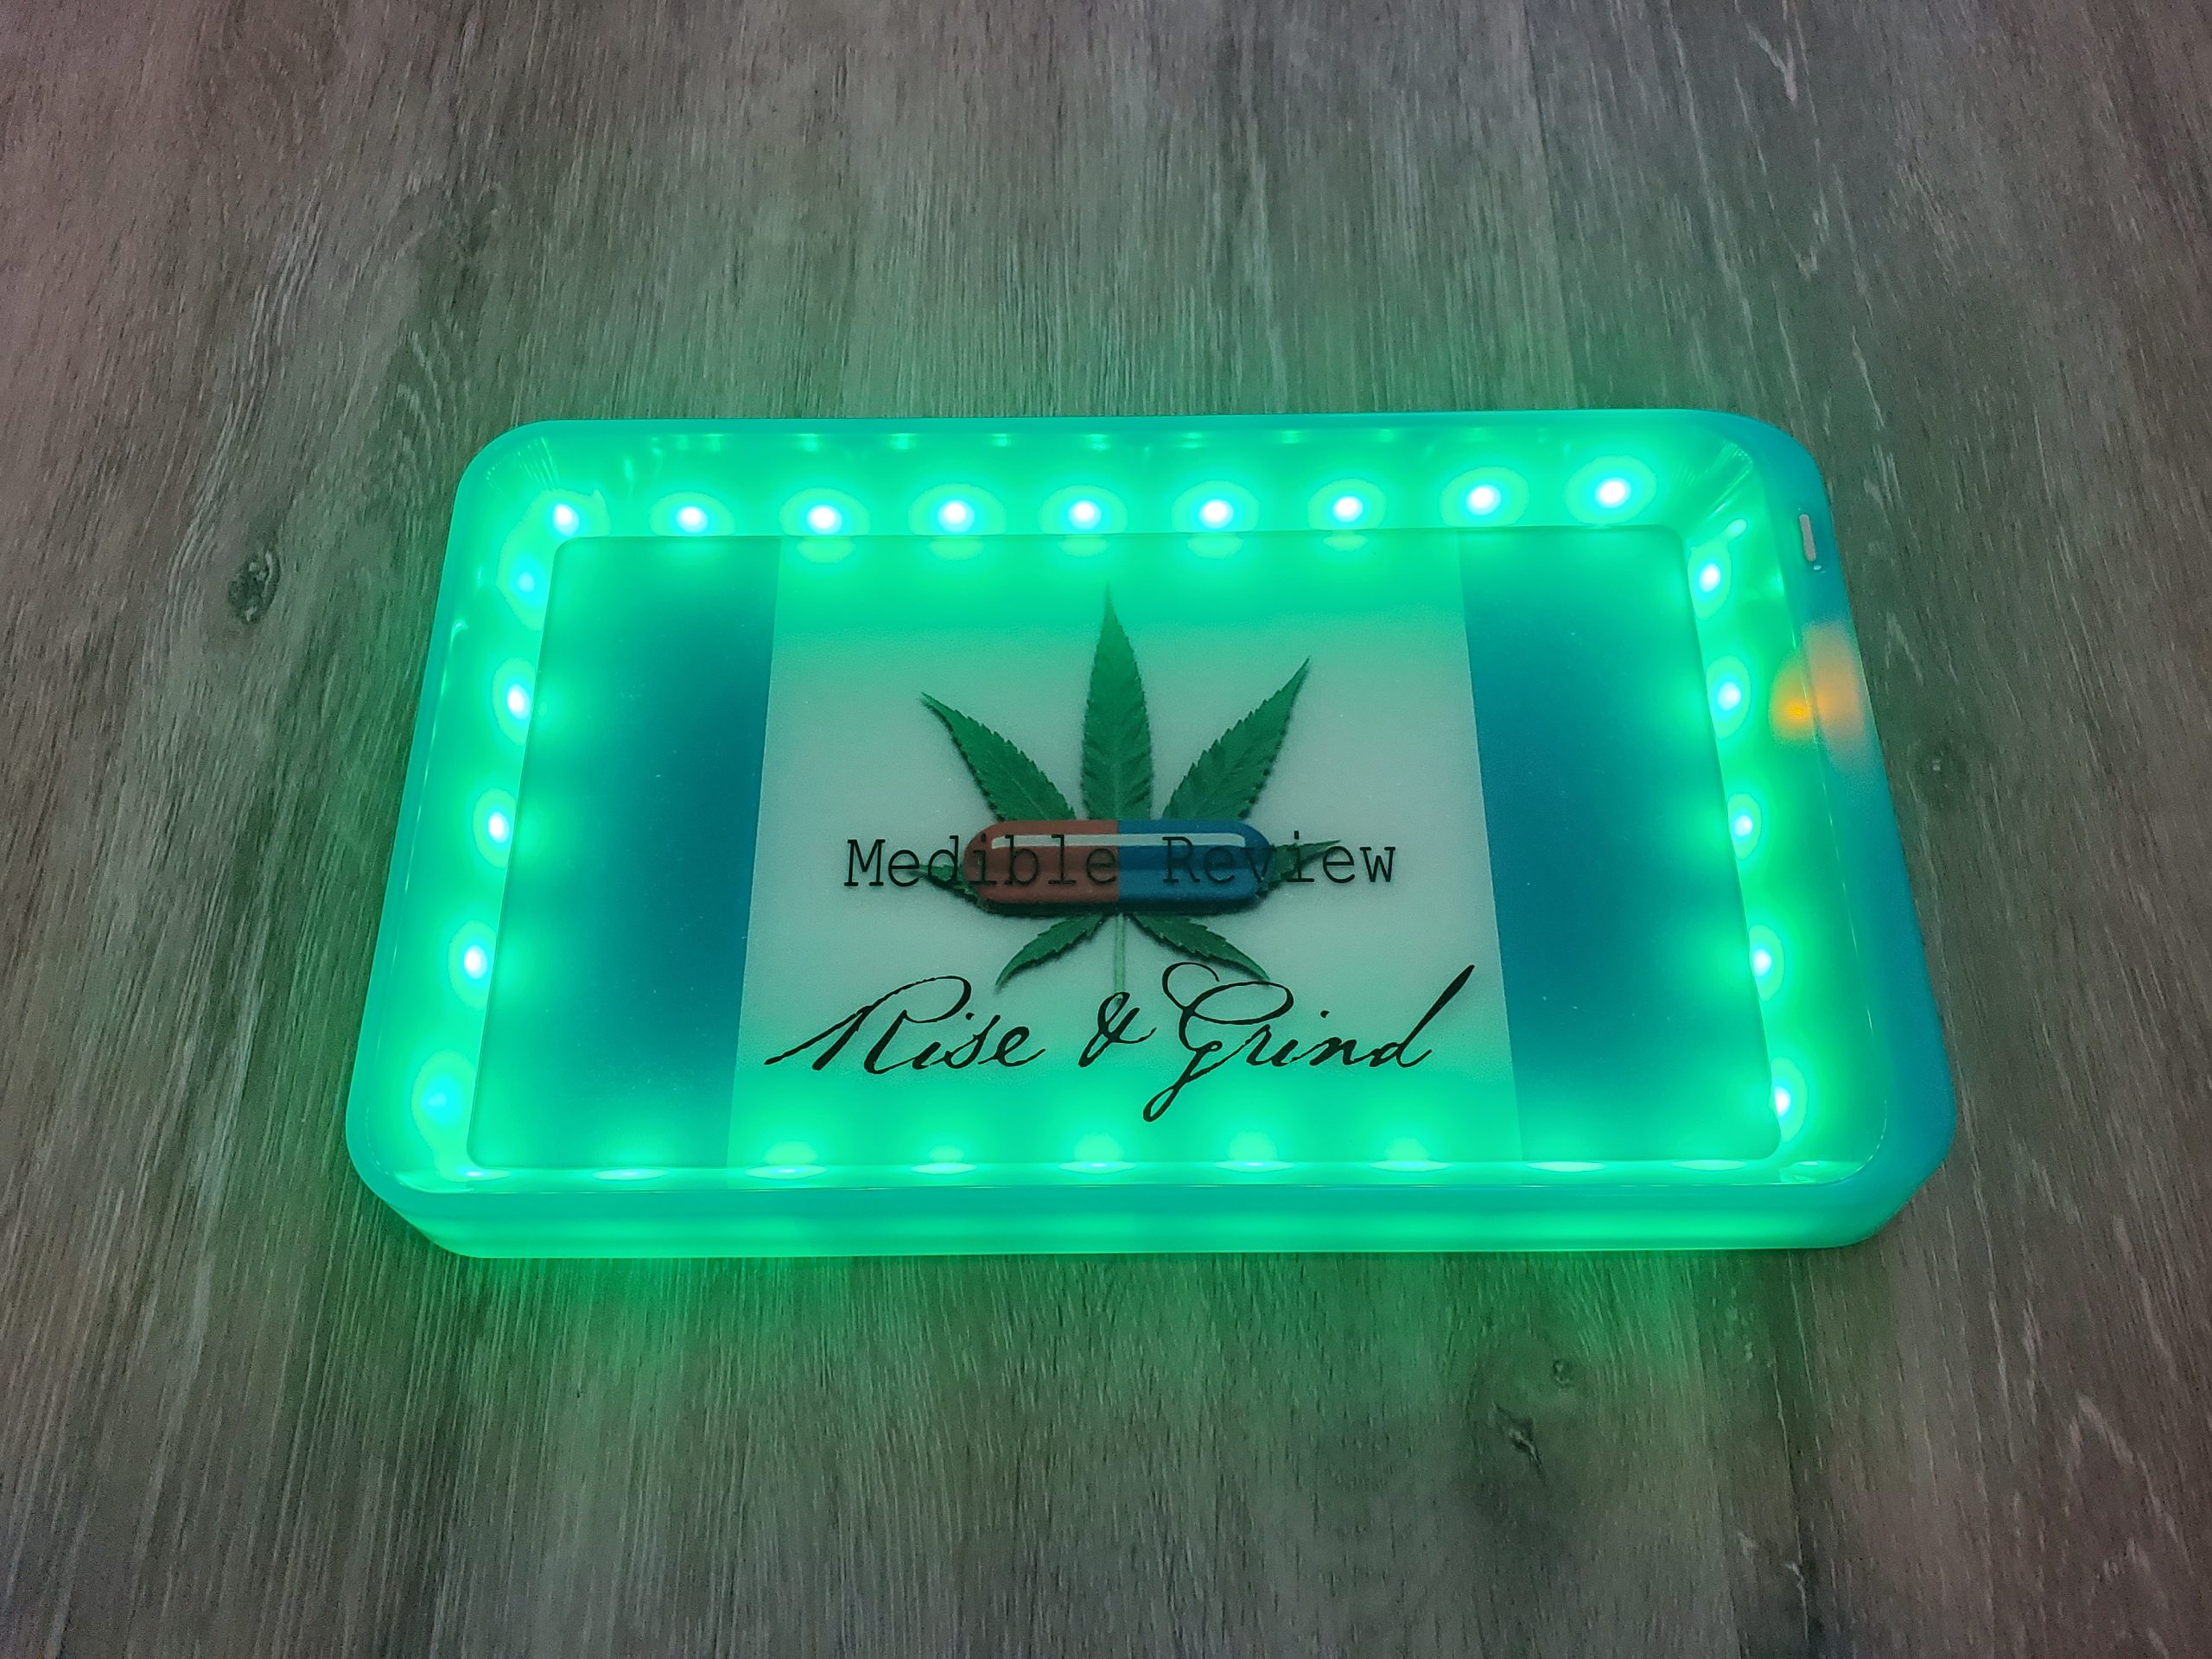 Medible review custom rolling tray scaled